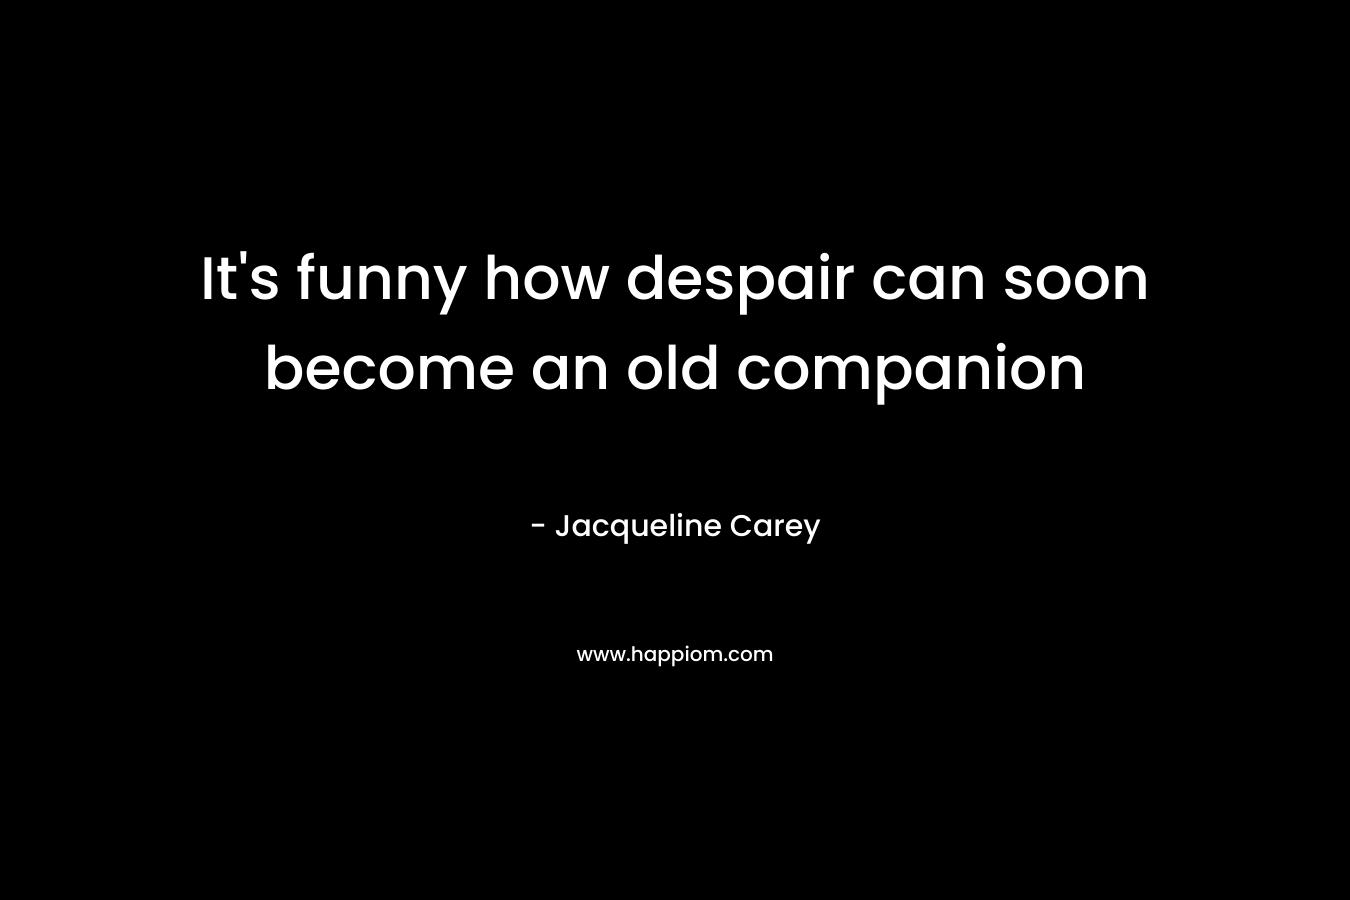 It's funny how despair can soon become an old companion